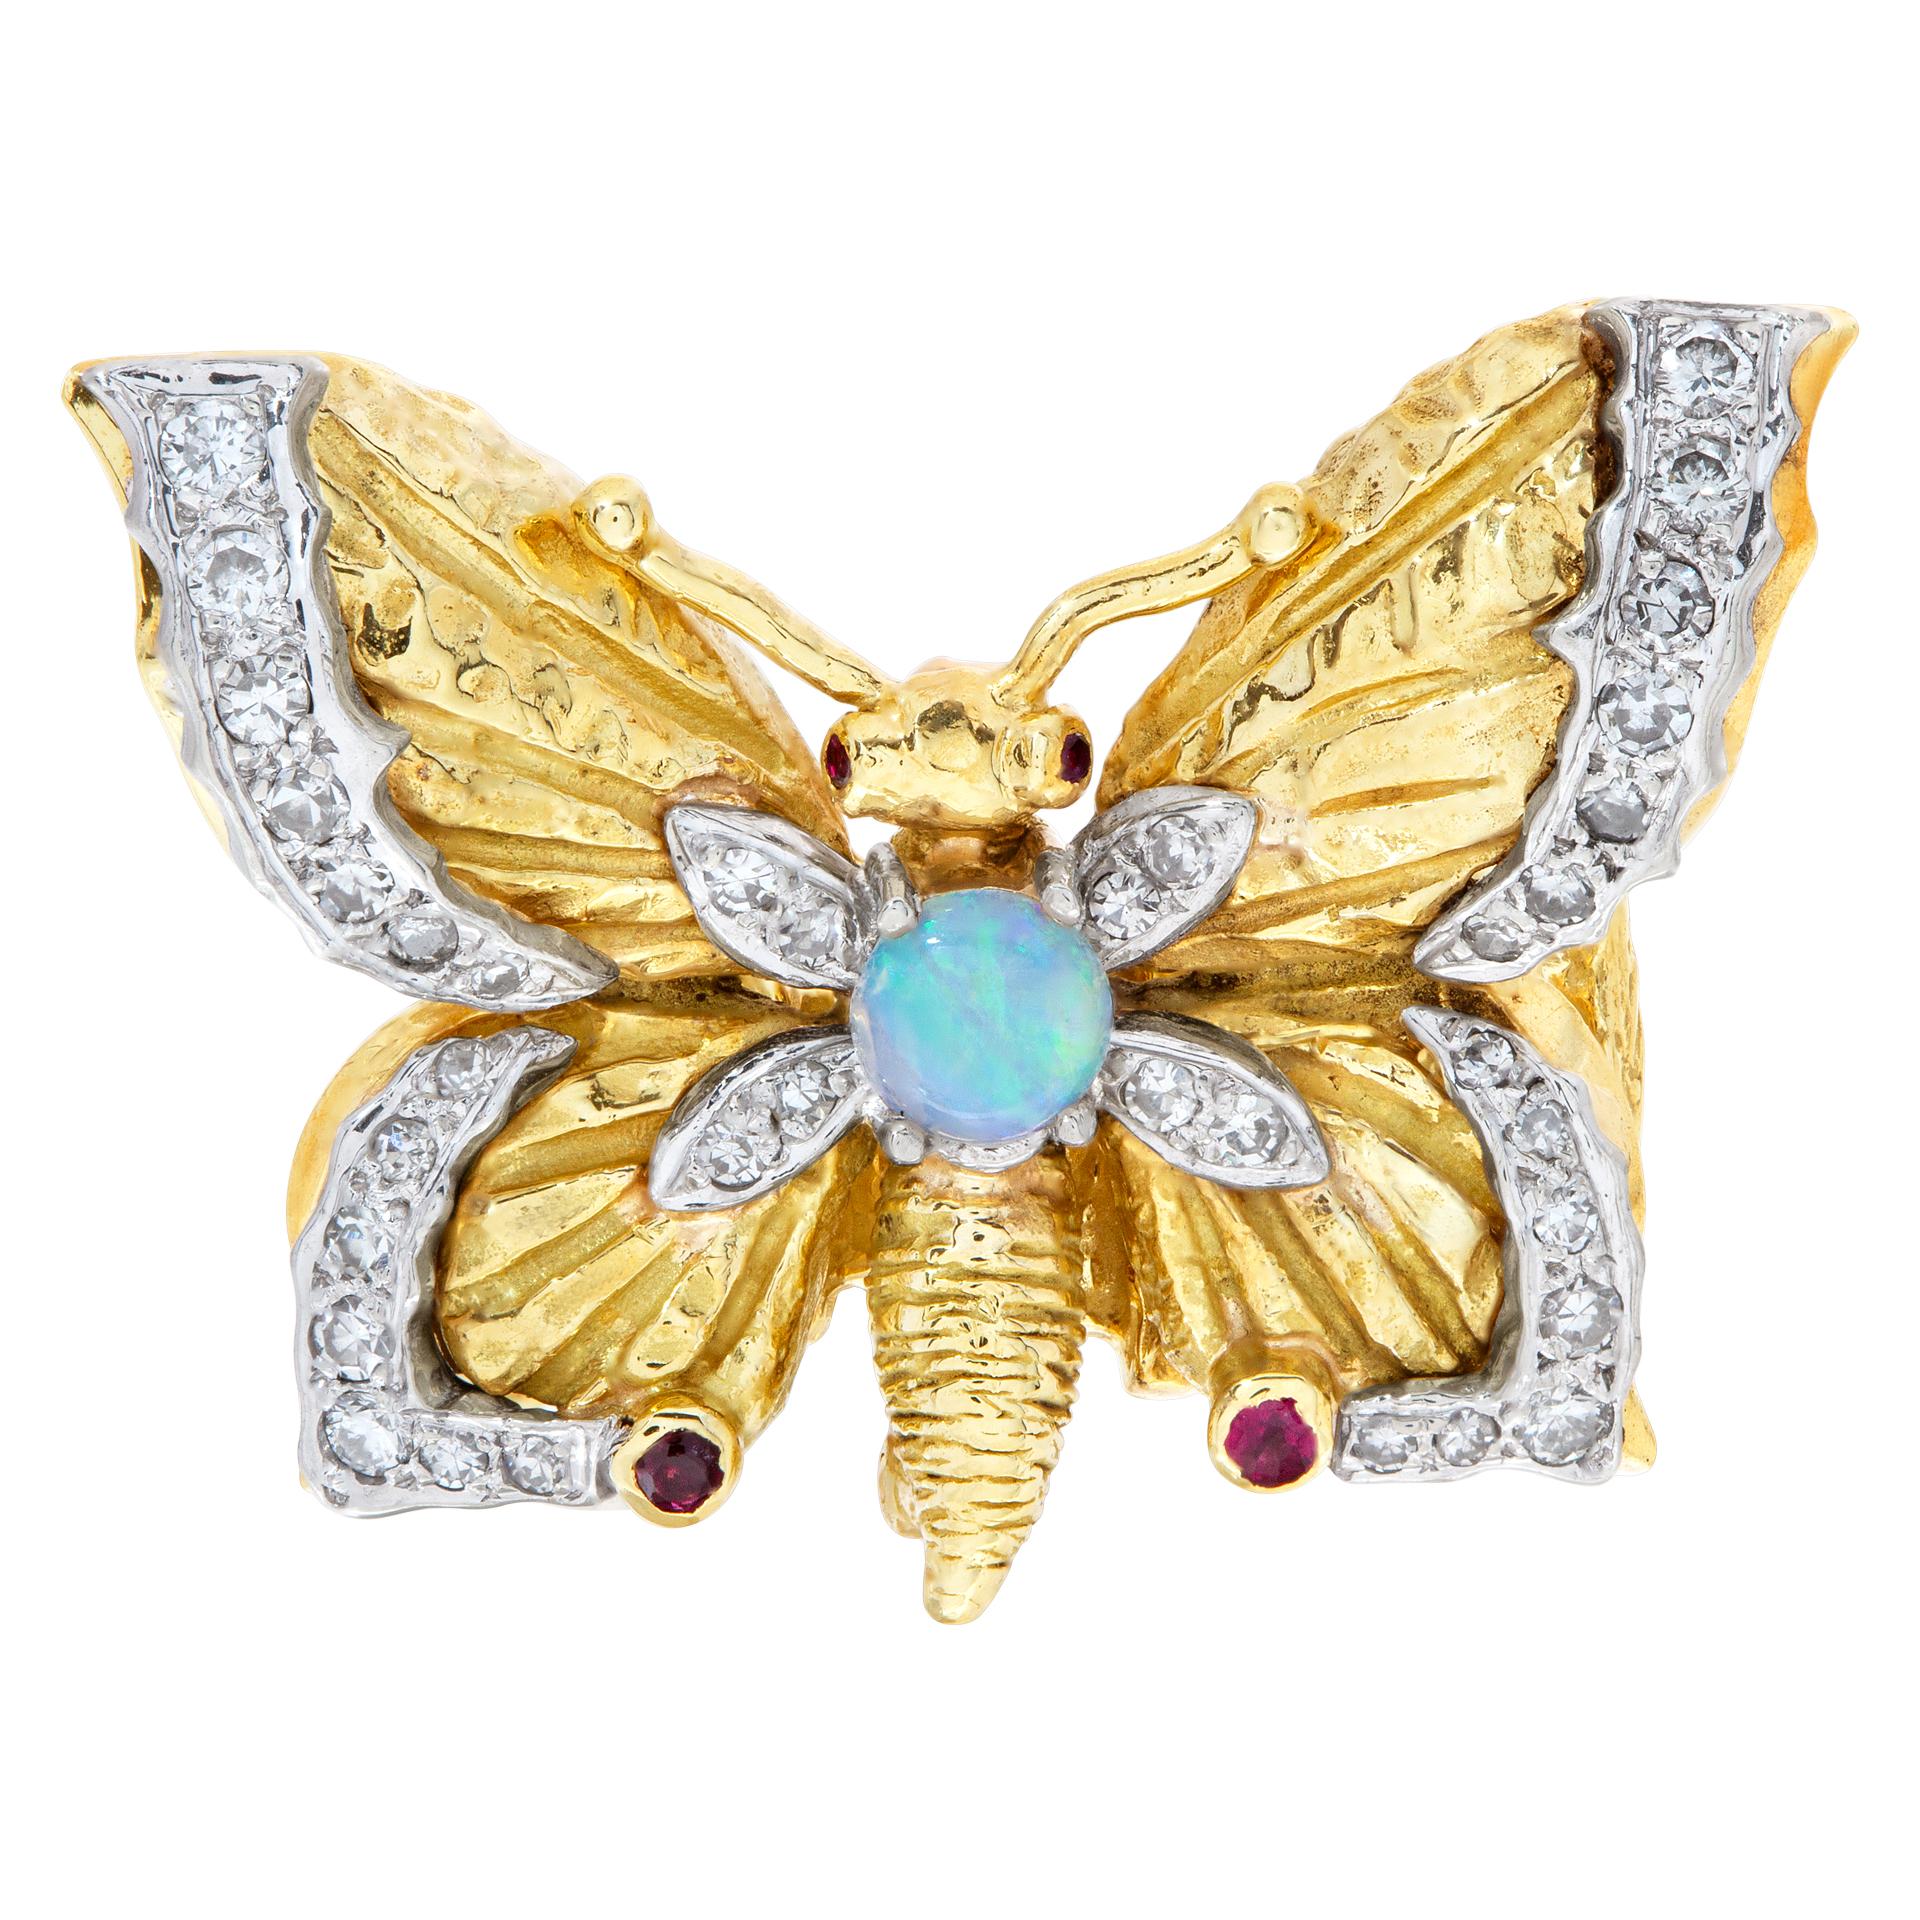 Beautiful butterfly with diamond accents, rubies and center opal in 18k yellow gold. Size 6.5.<br /><br />This Diamond ring is currently size 6.5 and some items can be sized up or down, please ask! It weighs 10.2 pennyweights and is 18k.